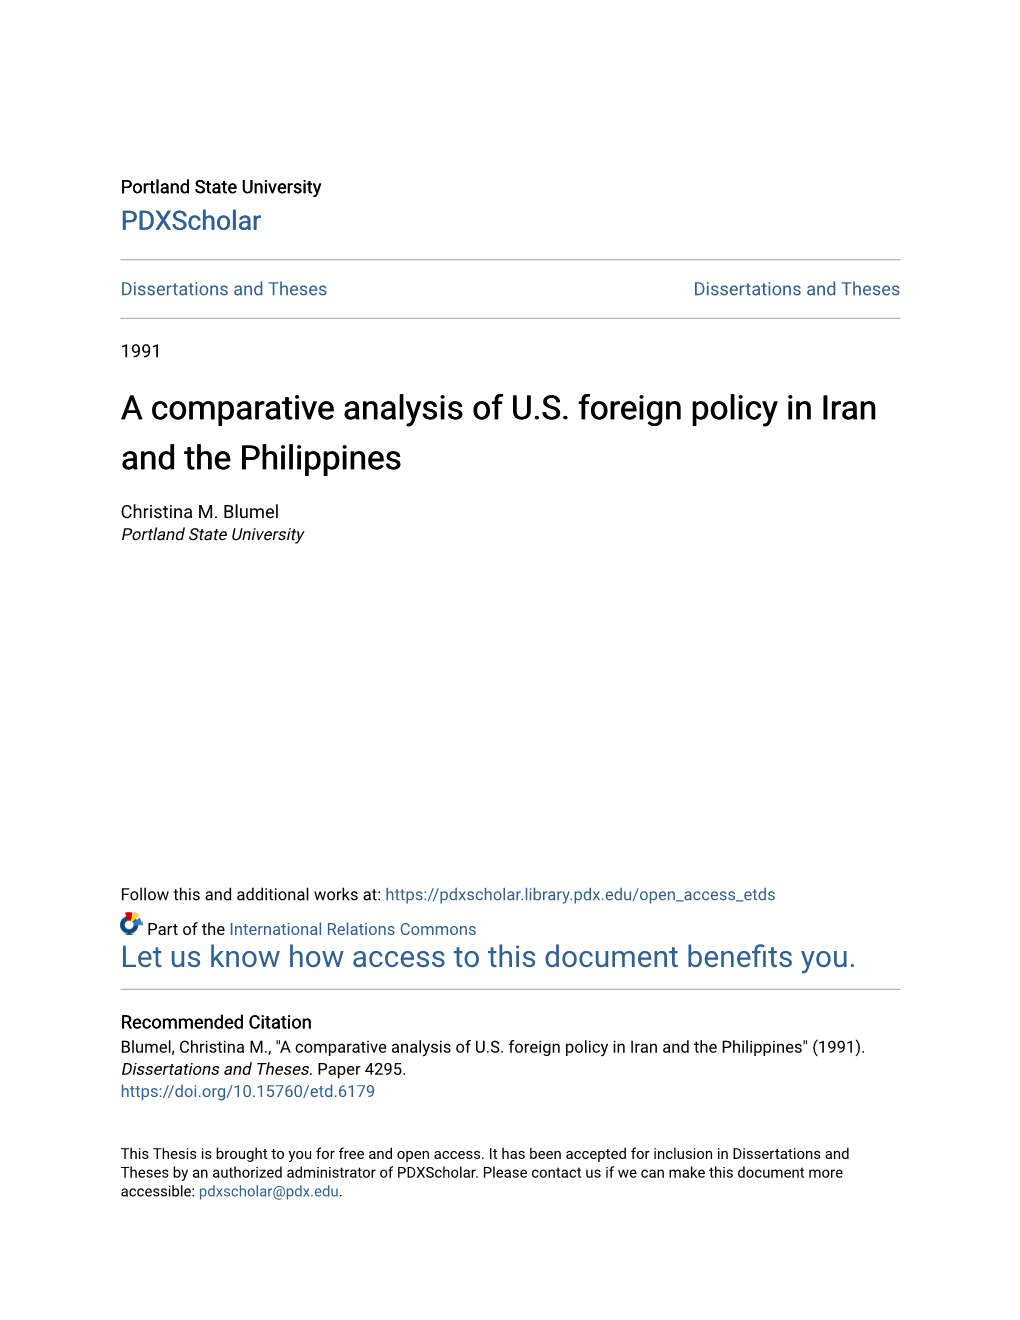 A Comparative Analysis of U.S. Foreign Policy in Iran and the Philippines